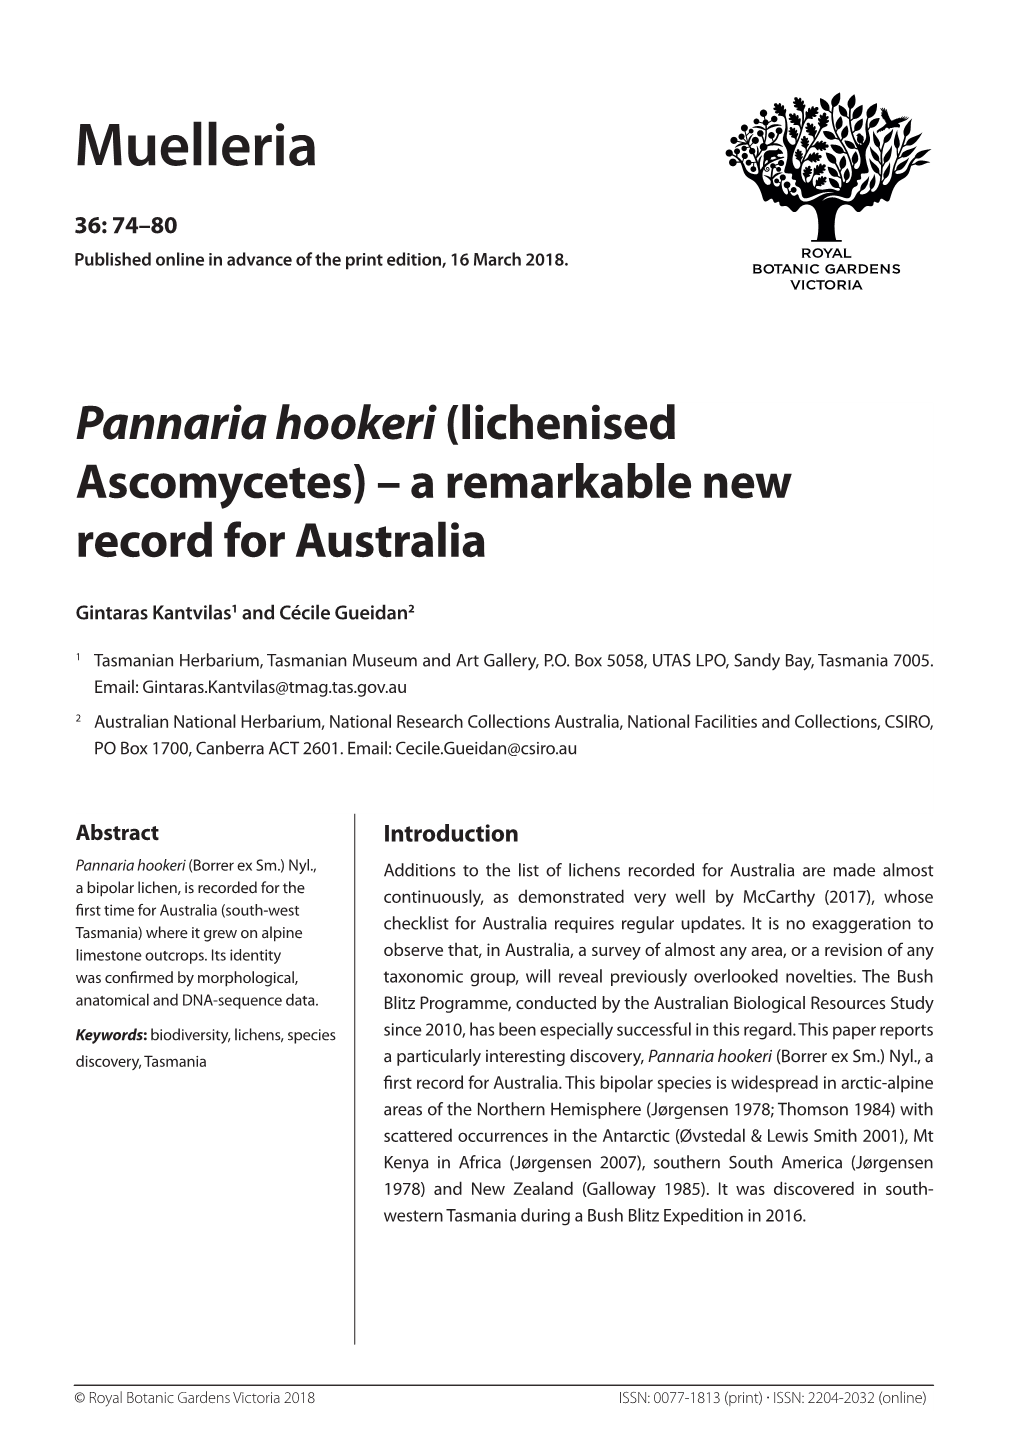 Pannaria Hookeri (Lichenised Ascomycetes) – a Remarkable New Record for Australia